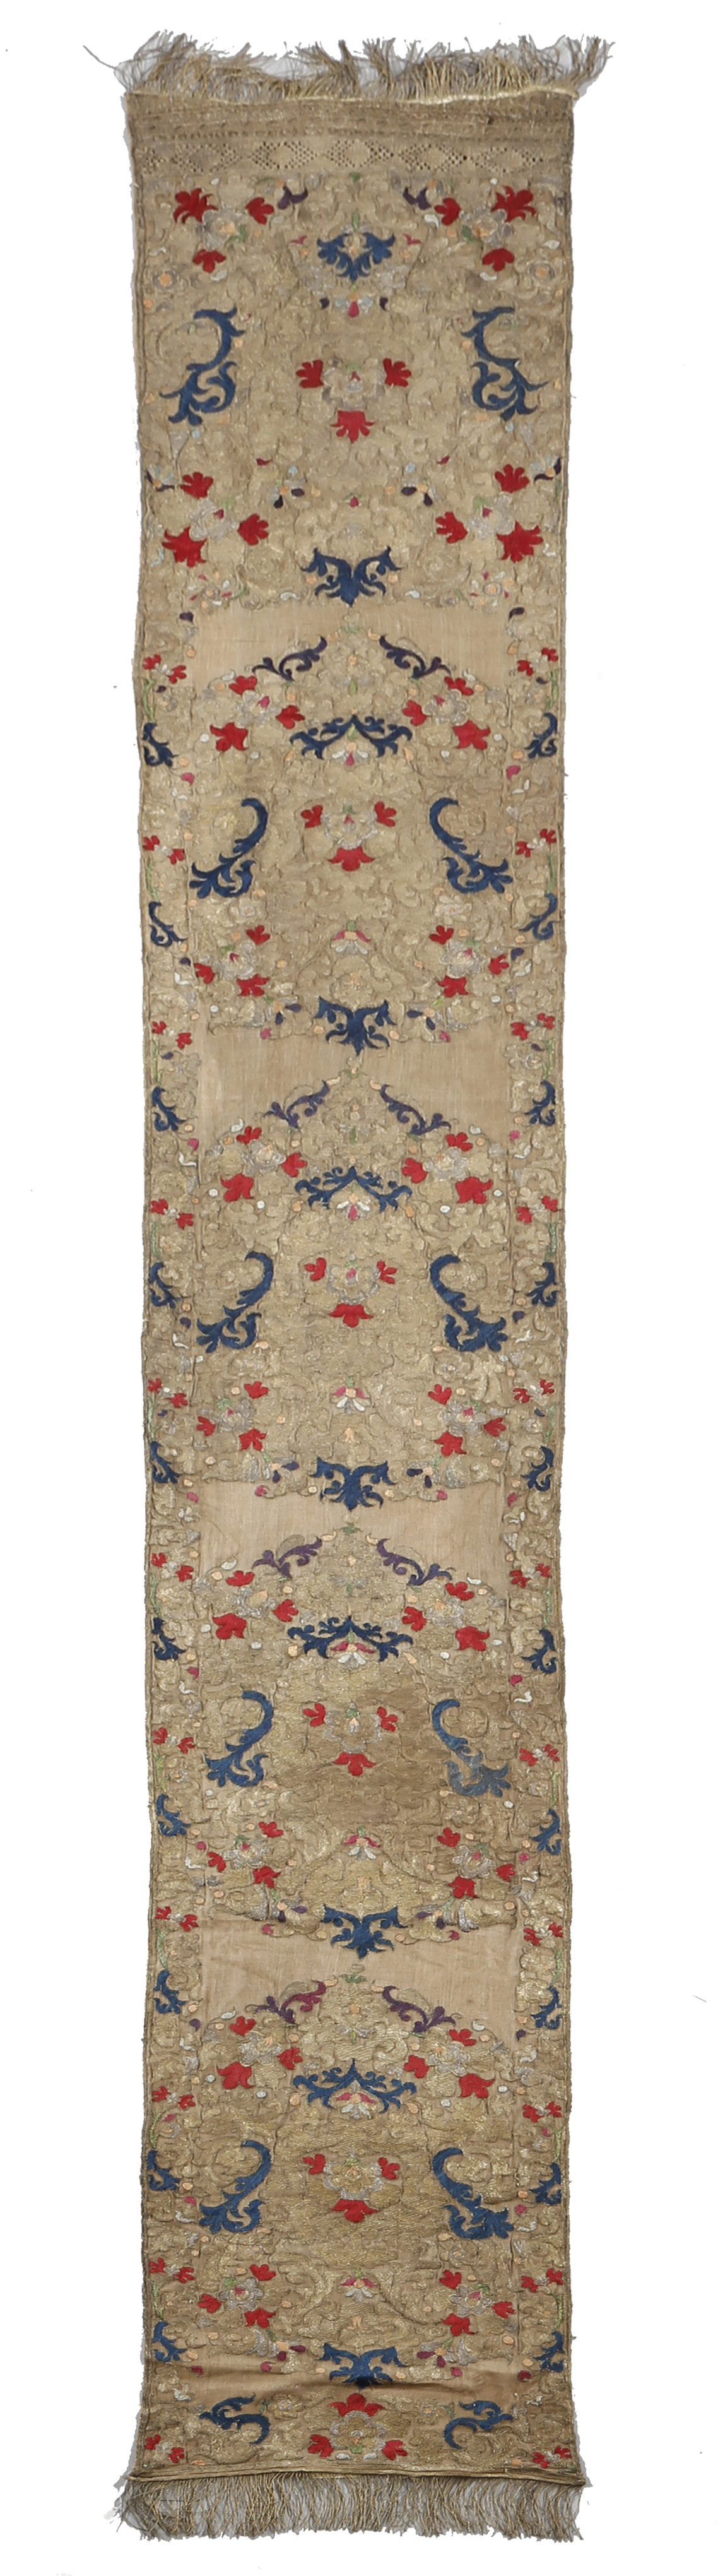 AN ALGERIAN SASH OTTOMAN, LATE 18TH / EARLY 19TH CENTURY the plain muslin ground embroidered with